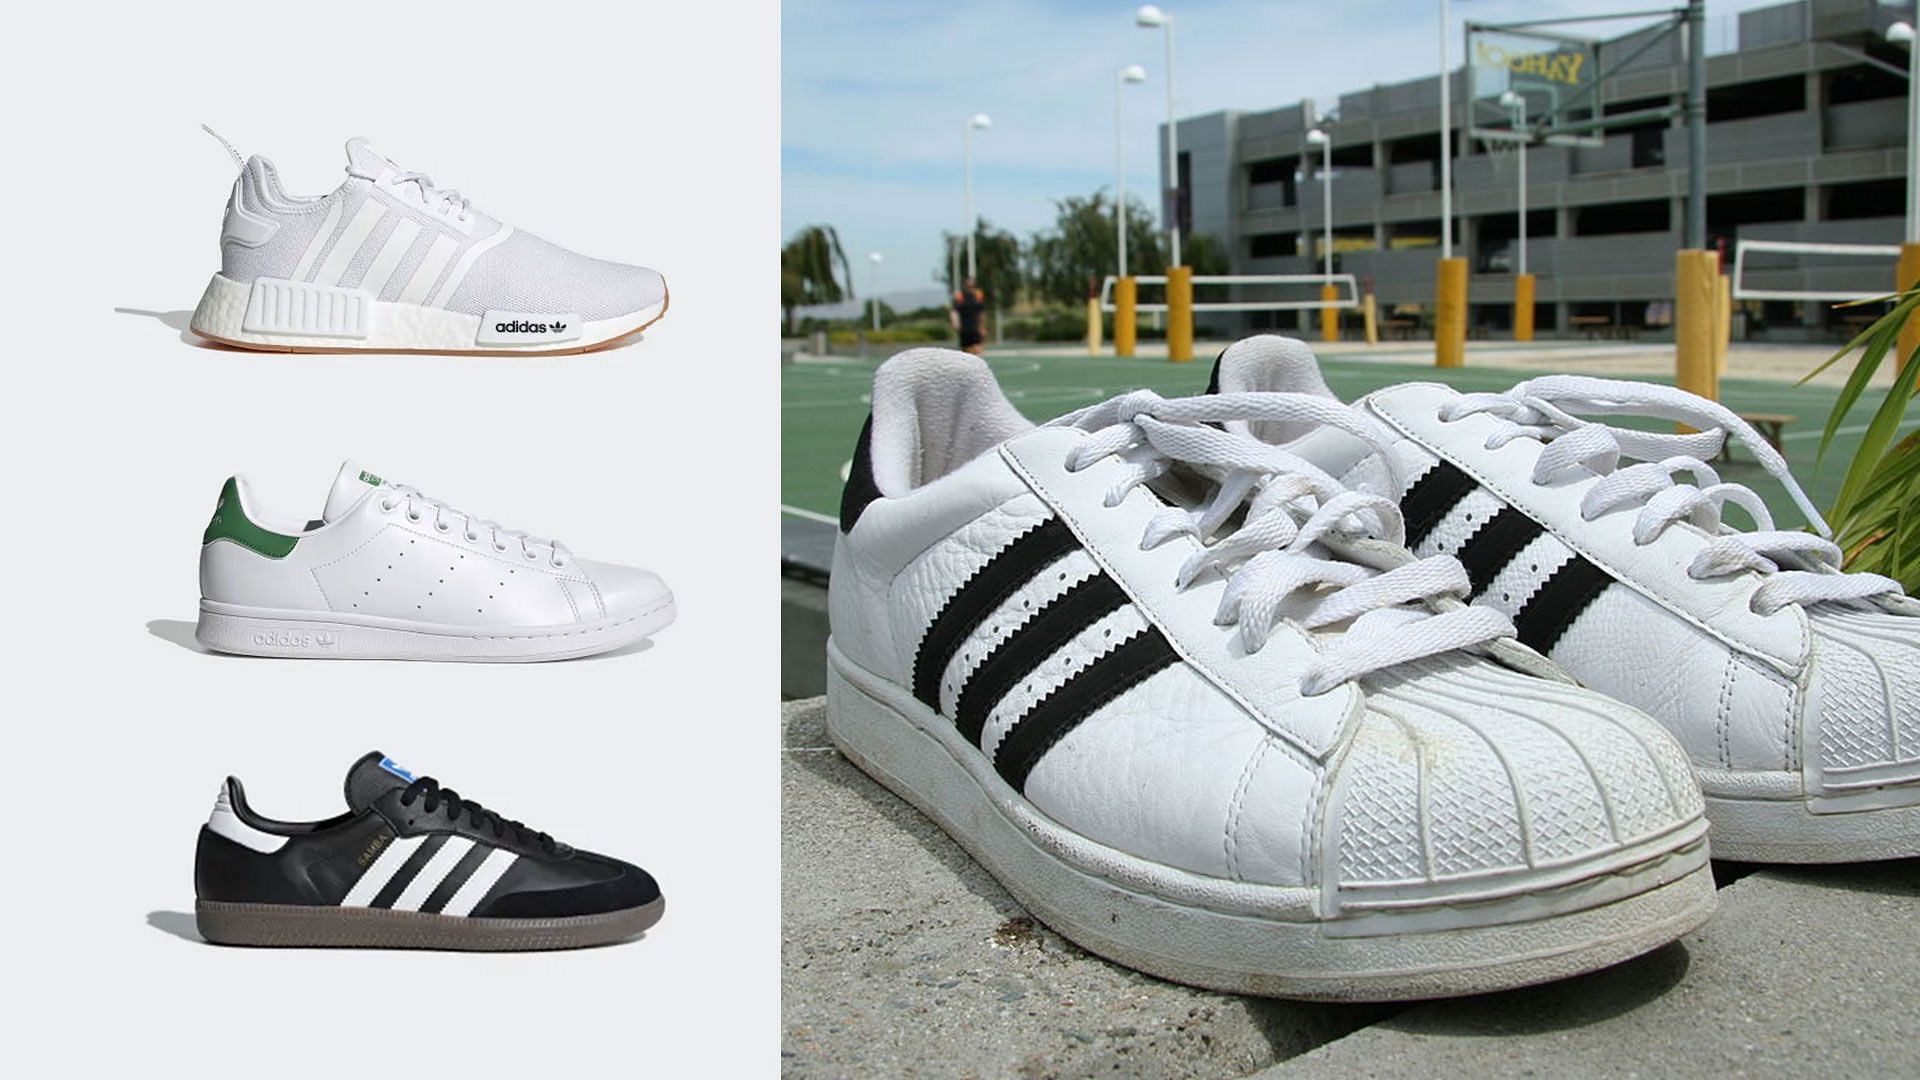 Adidas Stan Smith vs Superstar: Which Iconic Sneaker Comes Out on